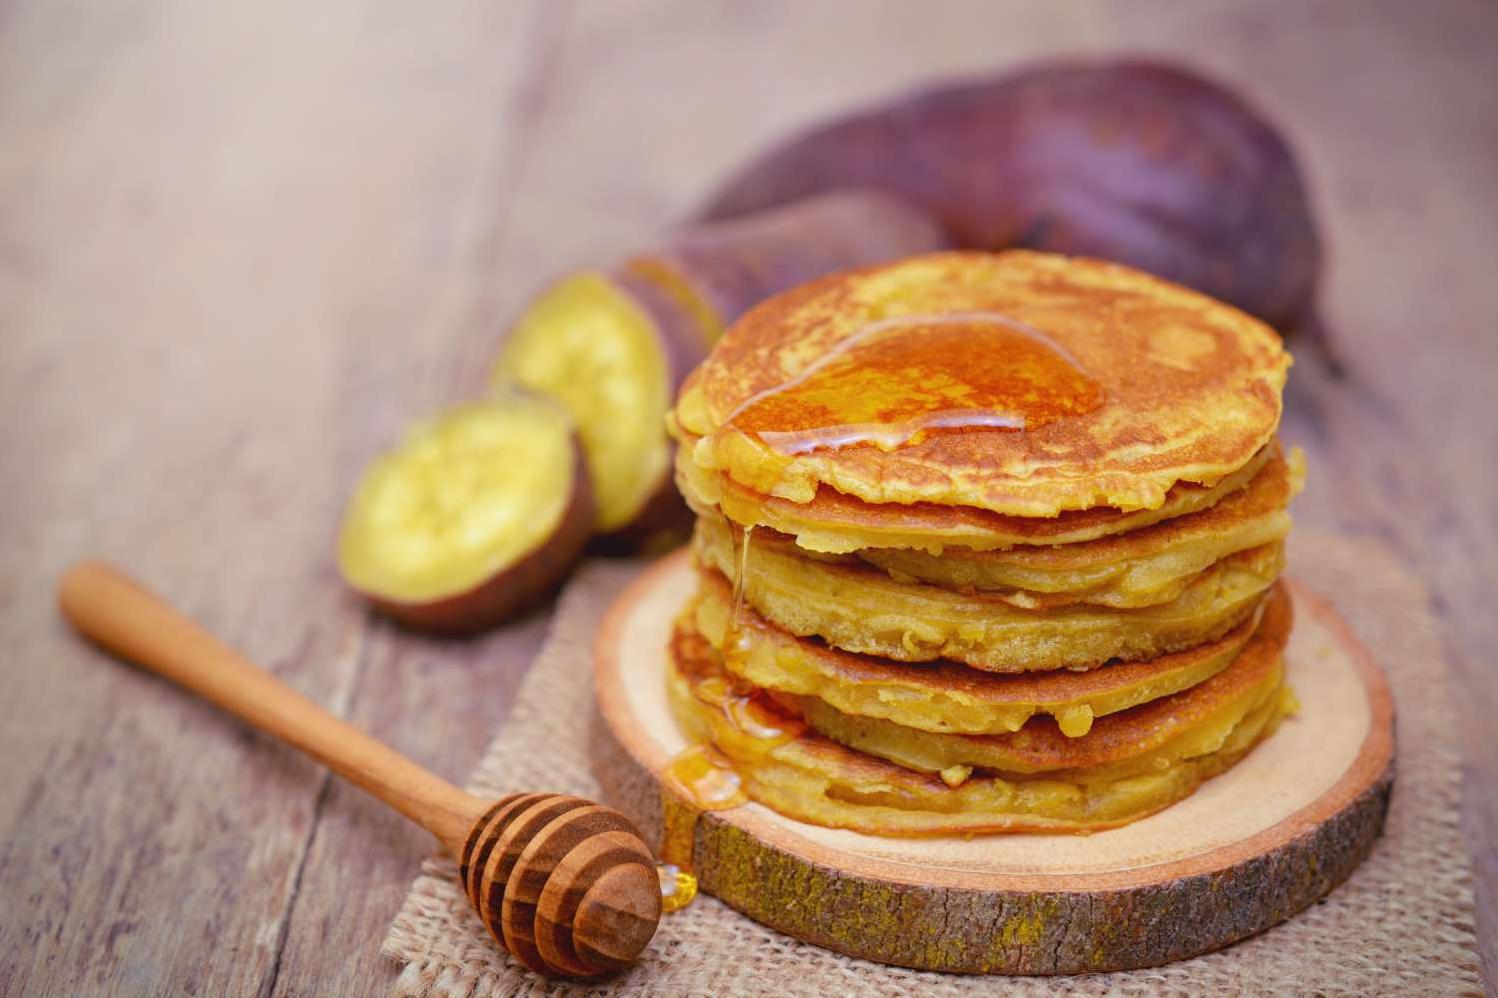  With a hint of cinnamon and nutmeg, these pancakes will fill your kitchen with the scent of the